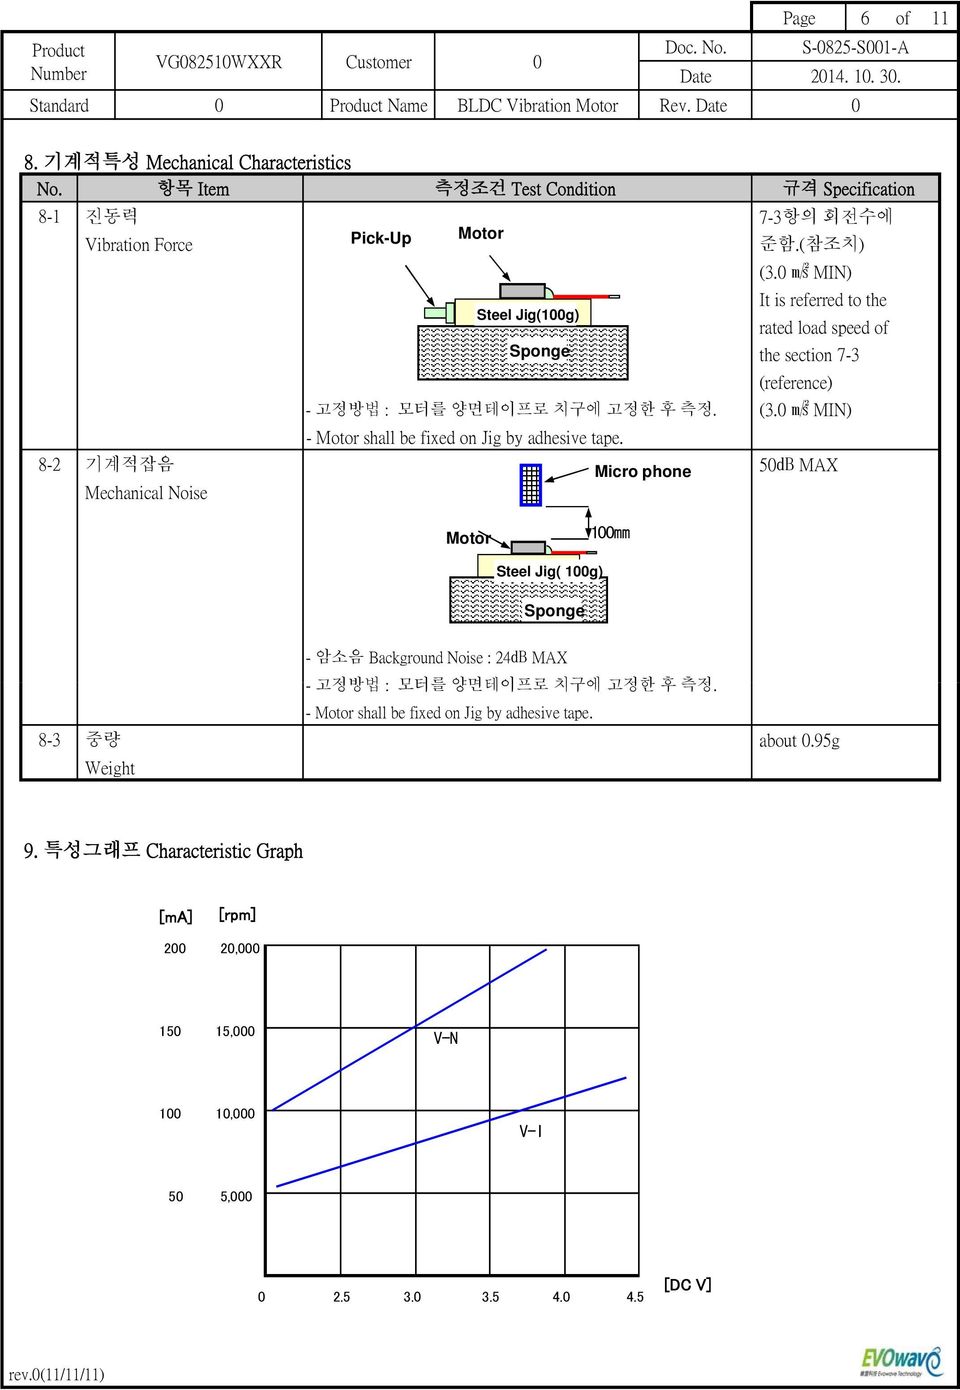 0 m s2 MIN) It is referred to the rated load speed of the section 7-3 (reference) - 고정방법 : 모터를 양면테이프로 치구에 고정한 후 측정. (3.0 m s2 MIN) - Motor shall be fixed on Jig by adhesive tape.